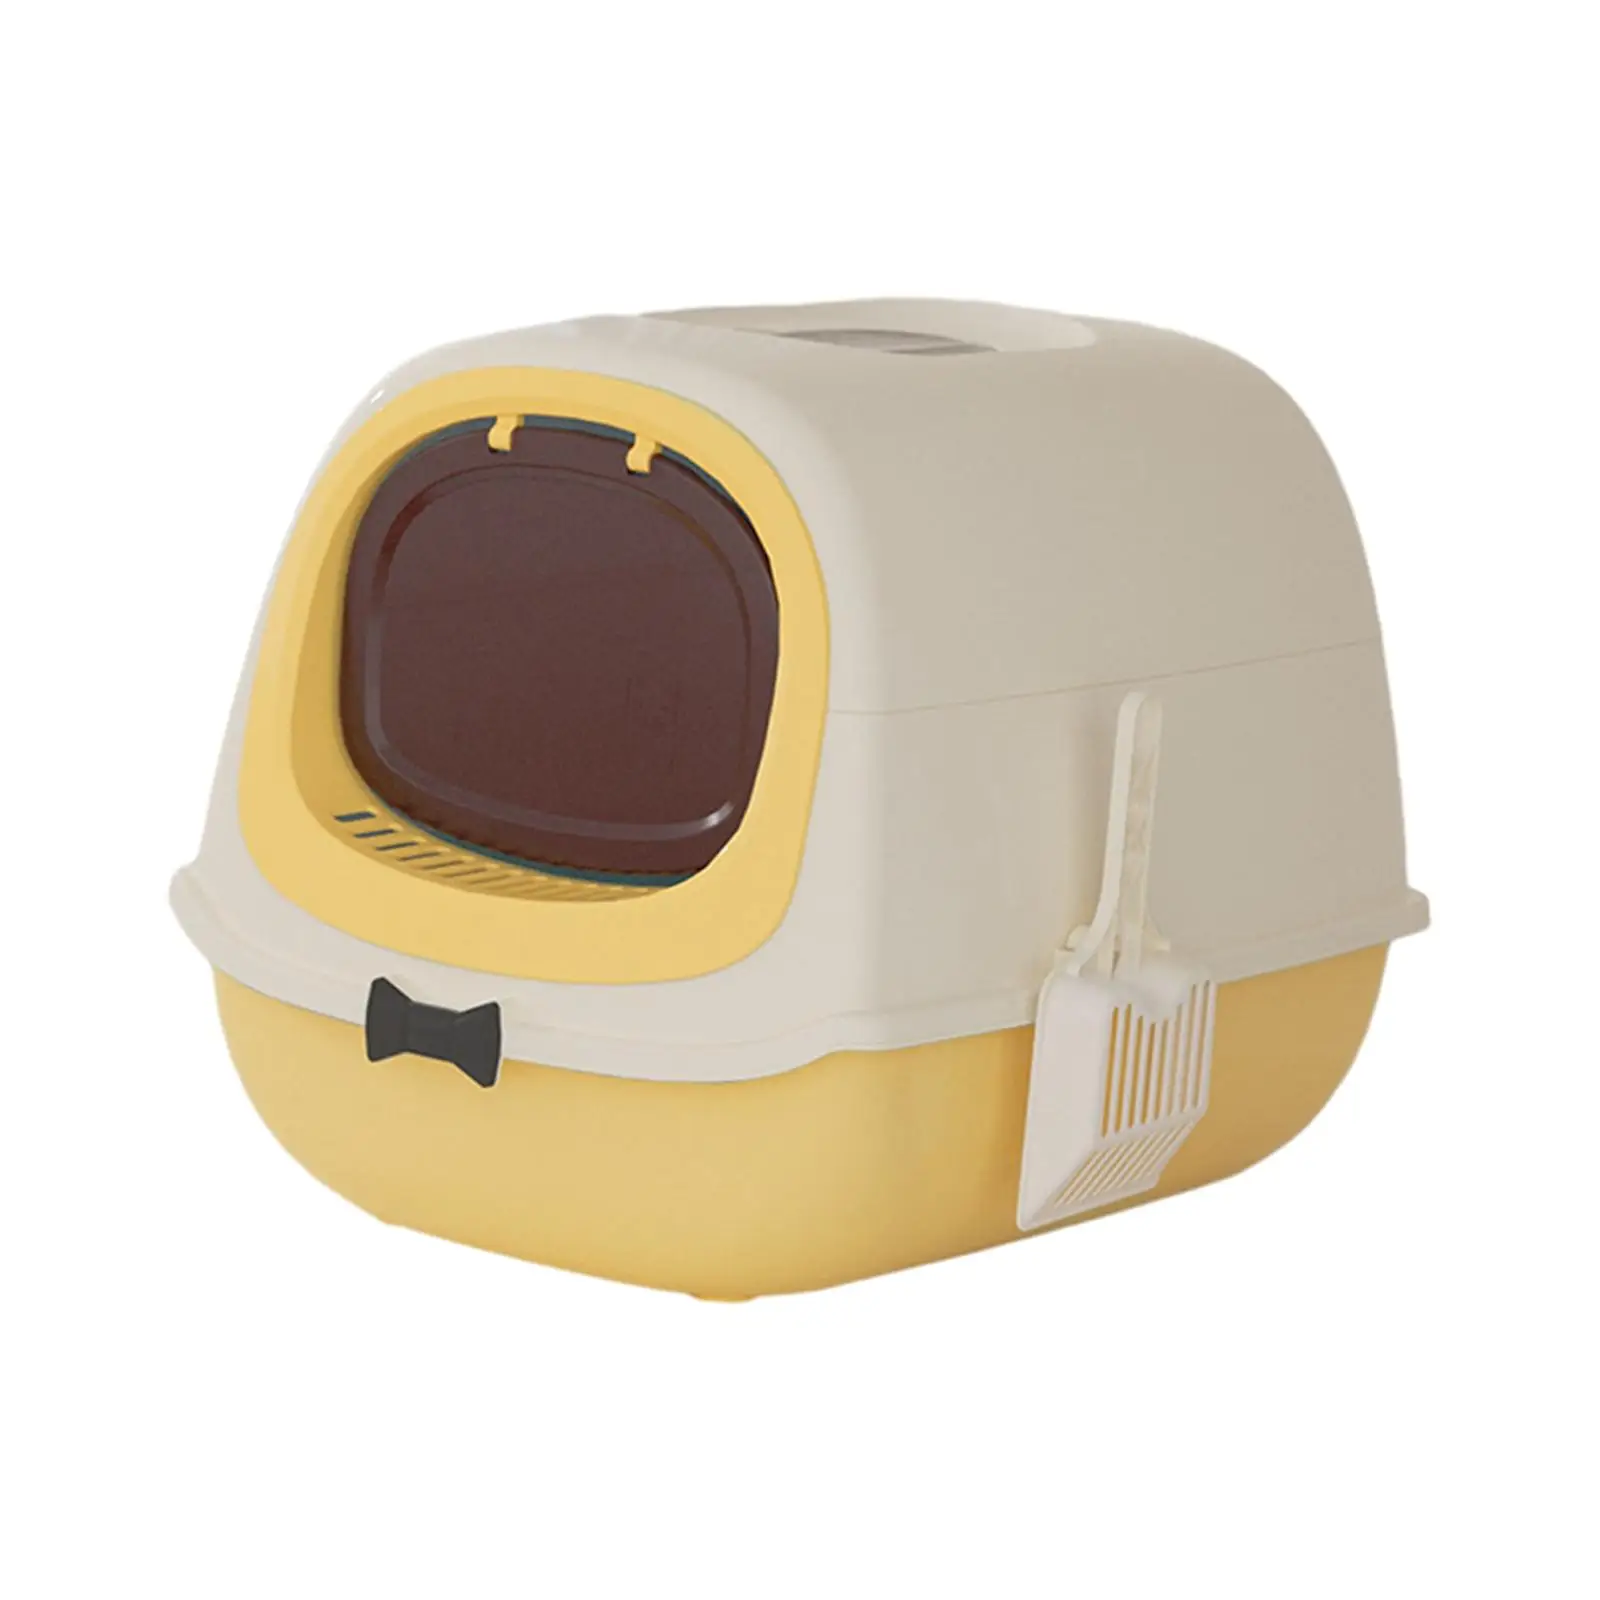 Hooded Cat Litter Box Pet Supplies Durable Detachable Easy to Clean Enclosed Cat Toilet Cat Litter Tray Kitty Litter Pan